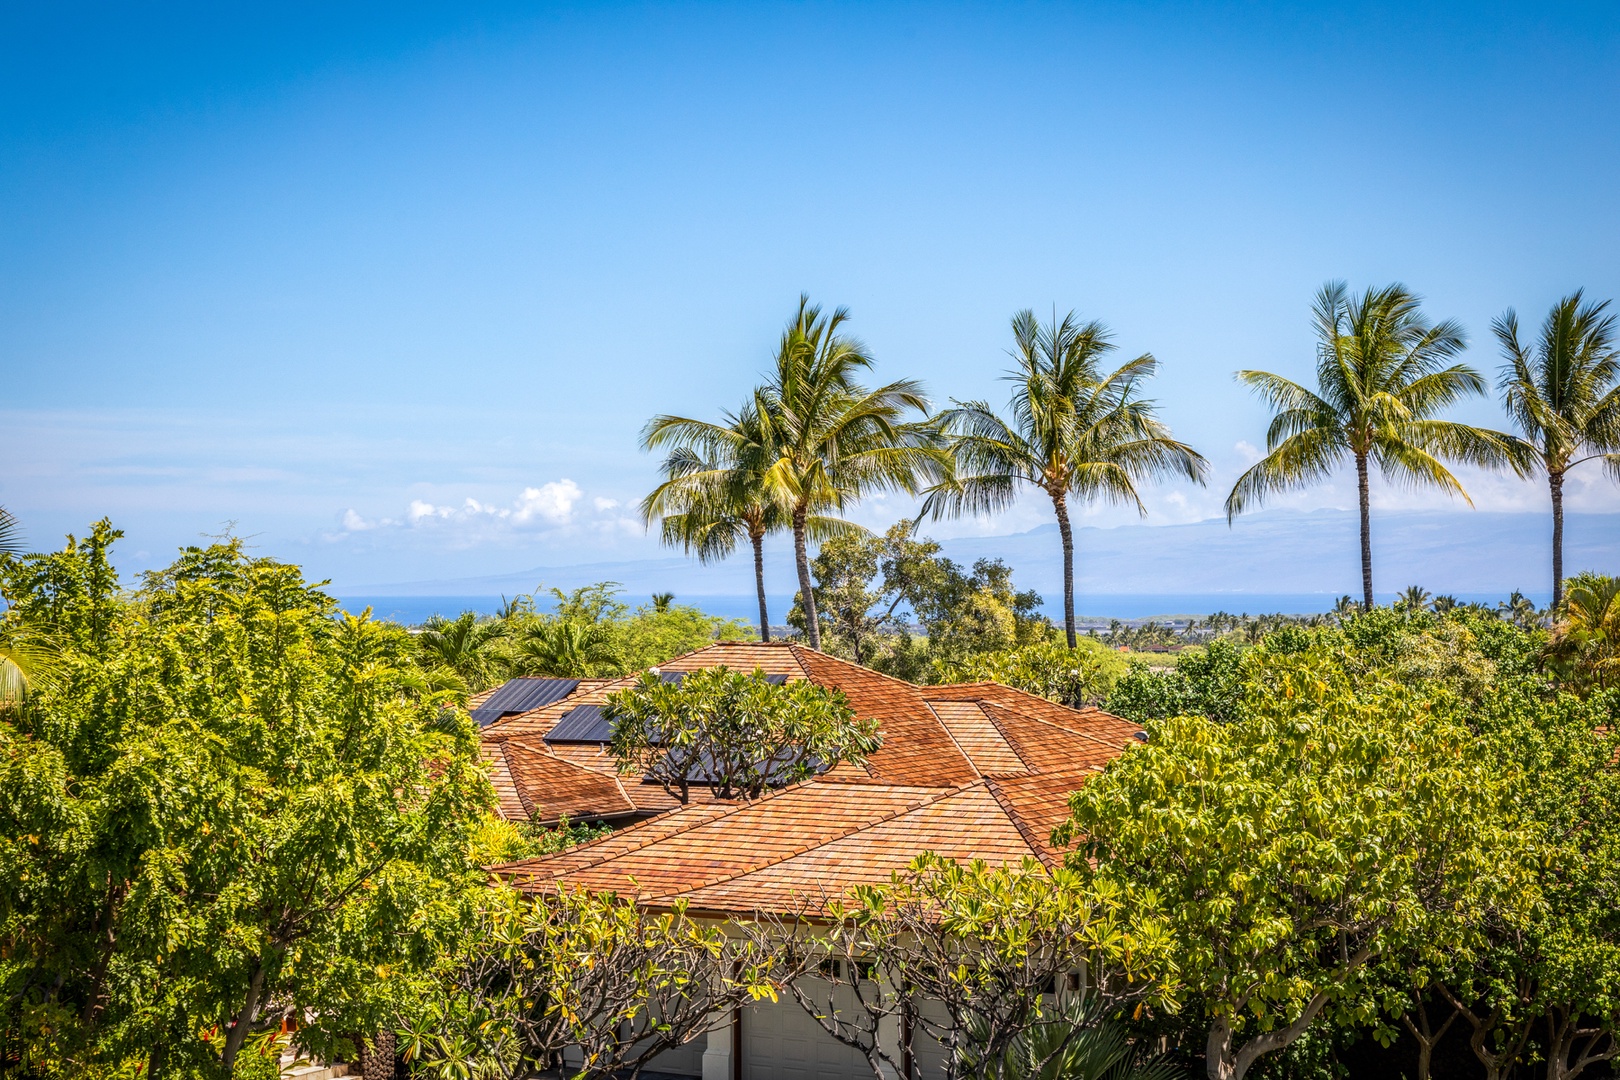 Kailua Kona Vacation Rentals, 3BD Hainoa Villa (2907C) at Four Seasons Resort at Hualalai - Closer look at the panoramic ocean views on offer from the lanai, great room, kitchen, and primary suite.